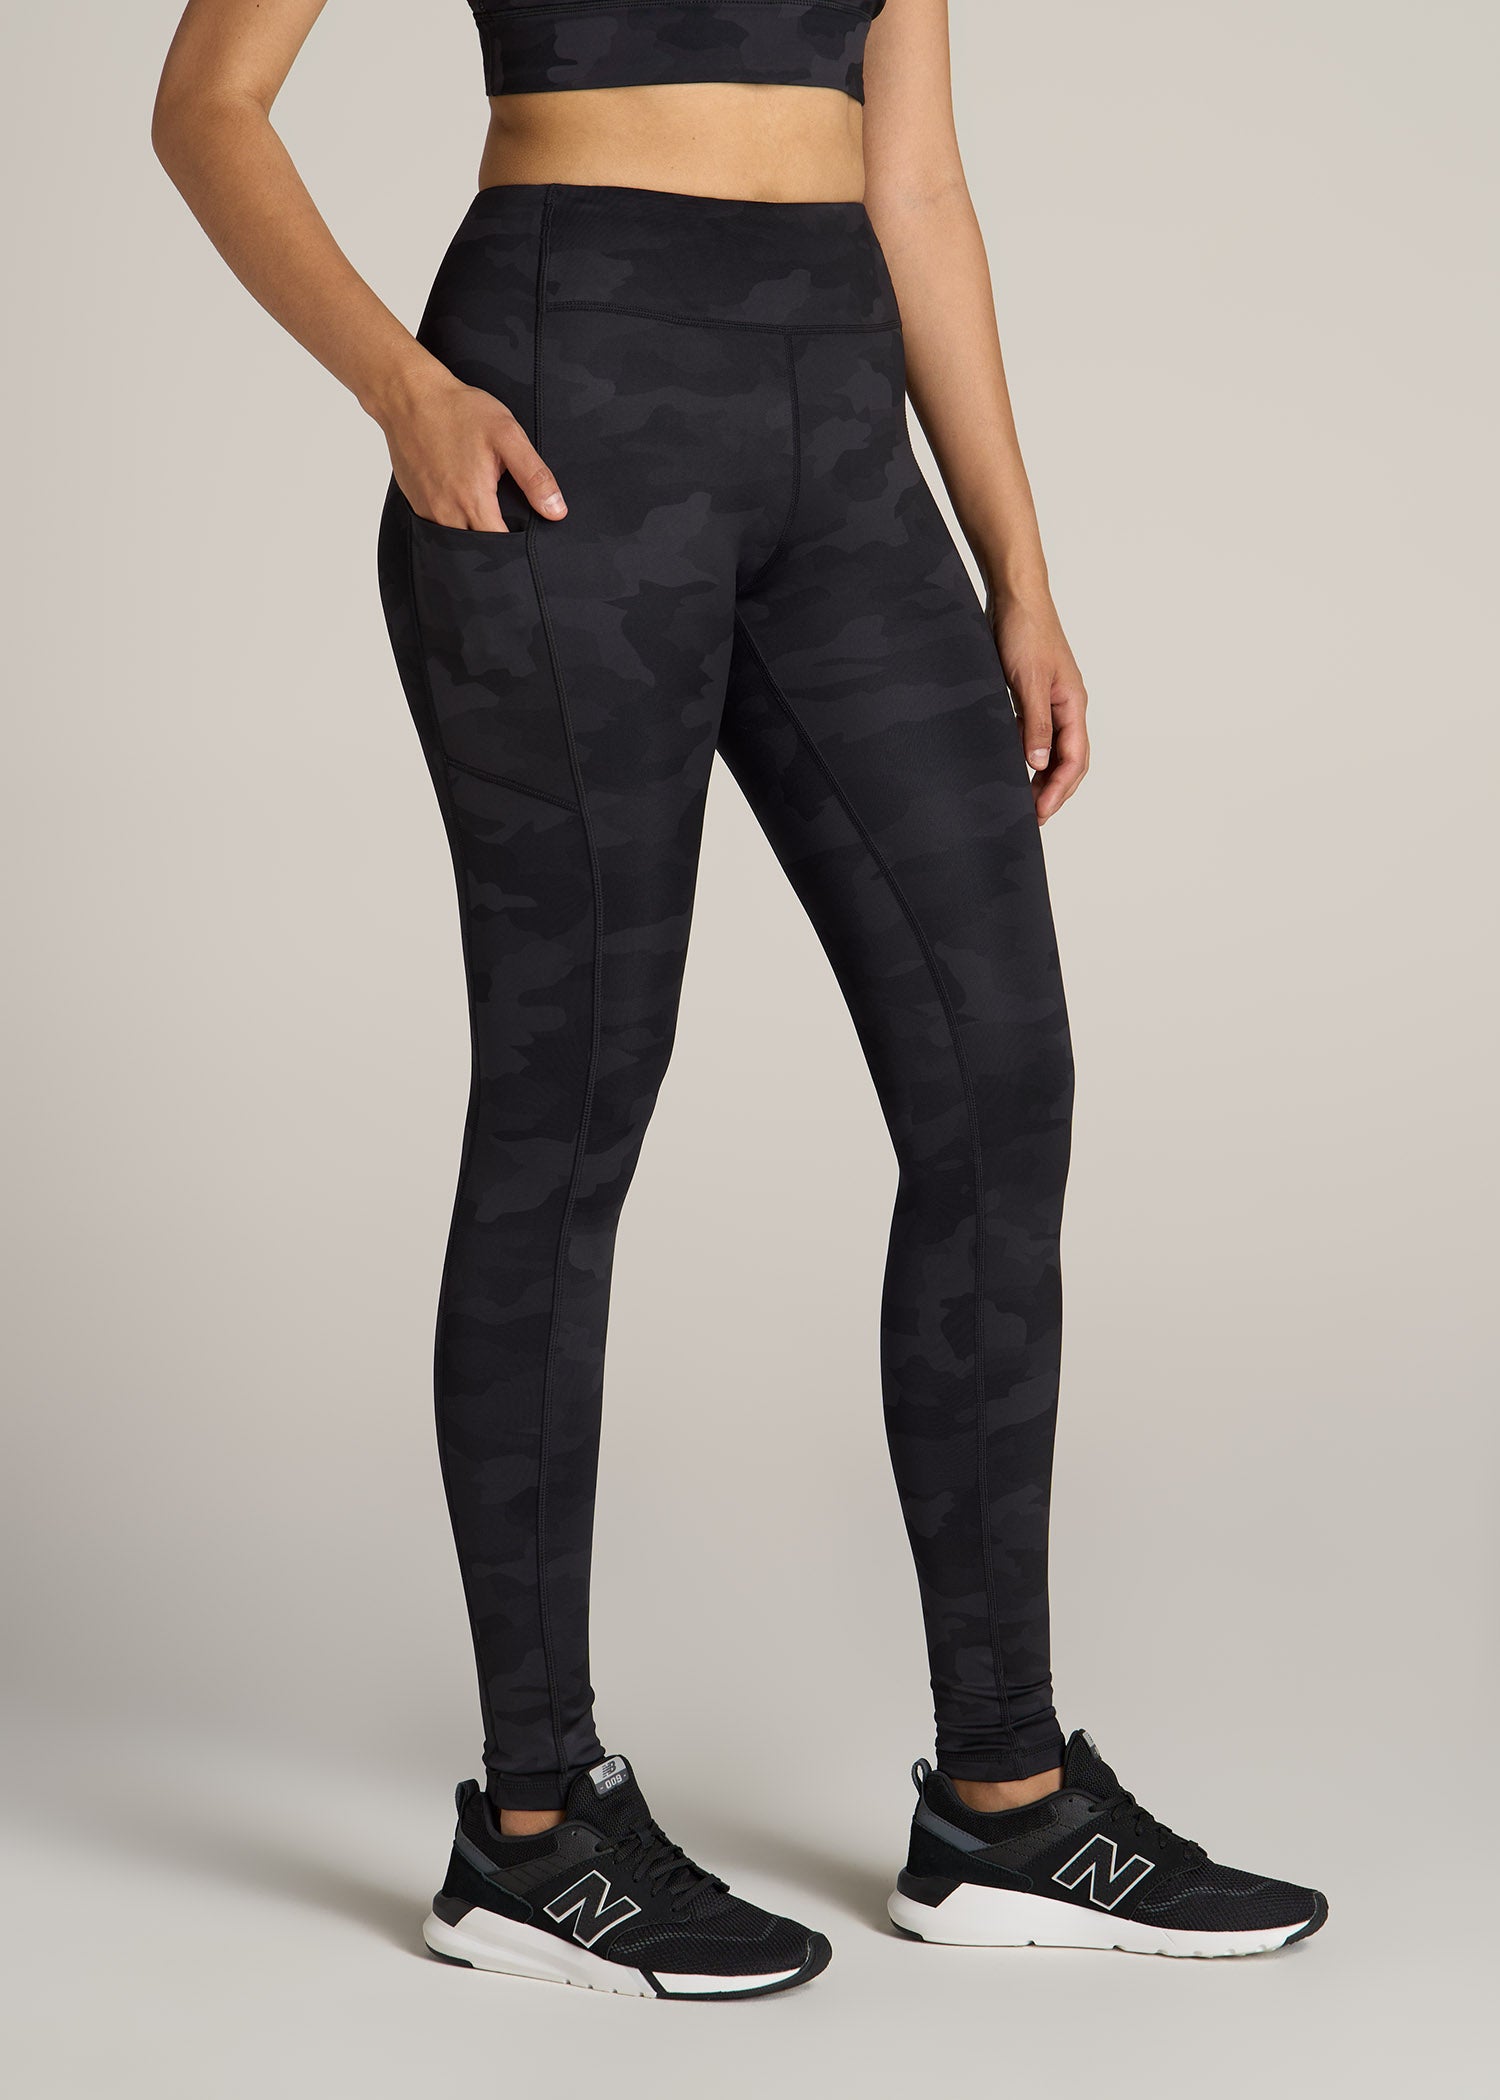 Stretchy Leggings with Pockets | Lands' End